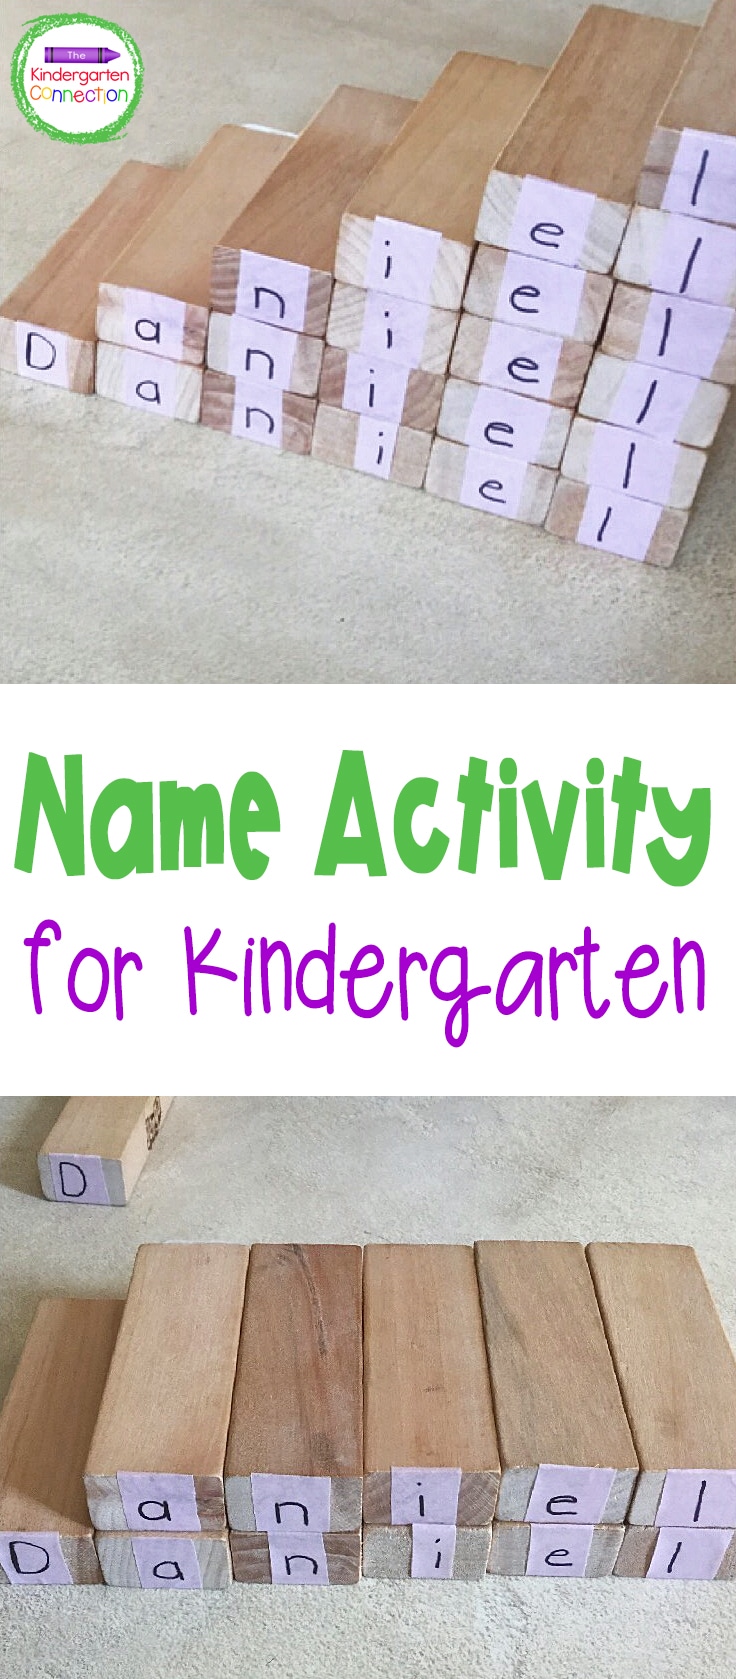 Practice sight word skills and name recognition with fun activities and games like this Name Towers Sight Word Activity for early learners!